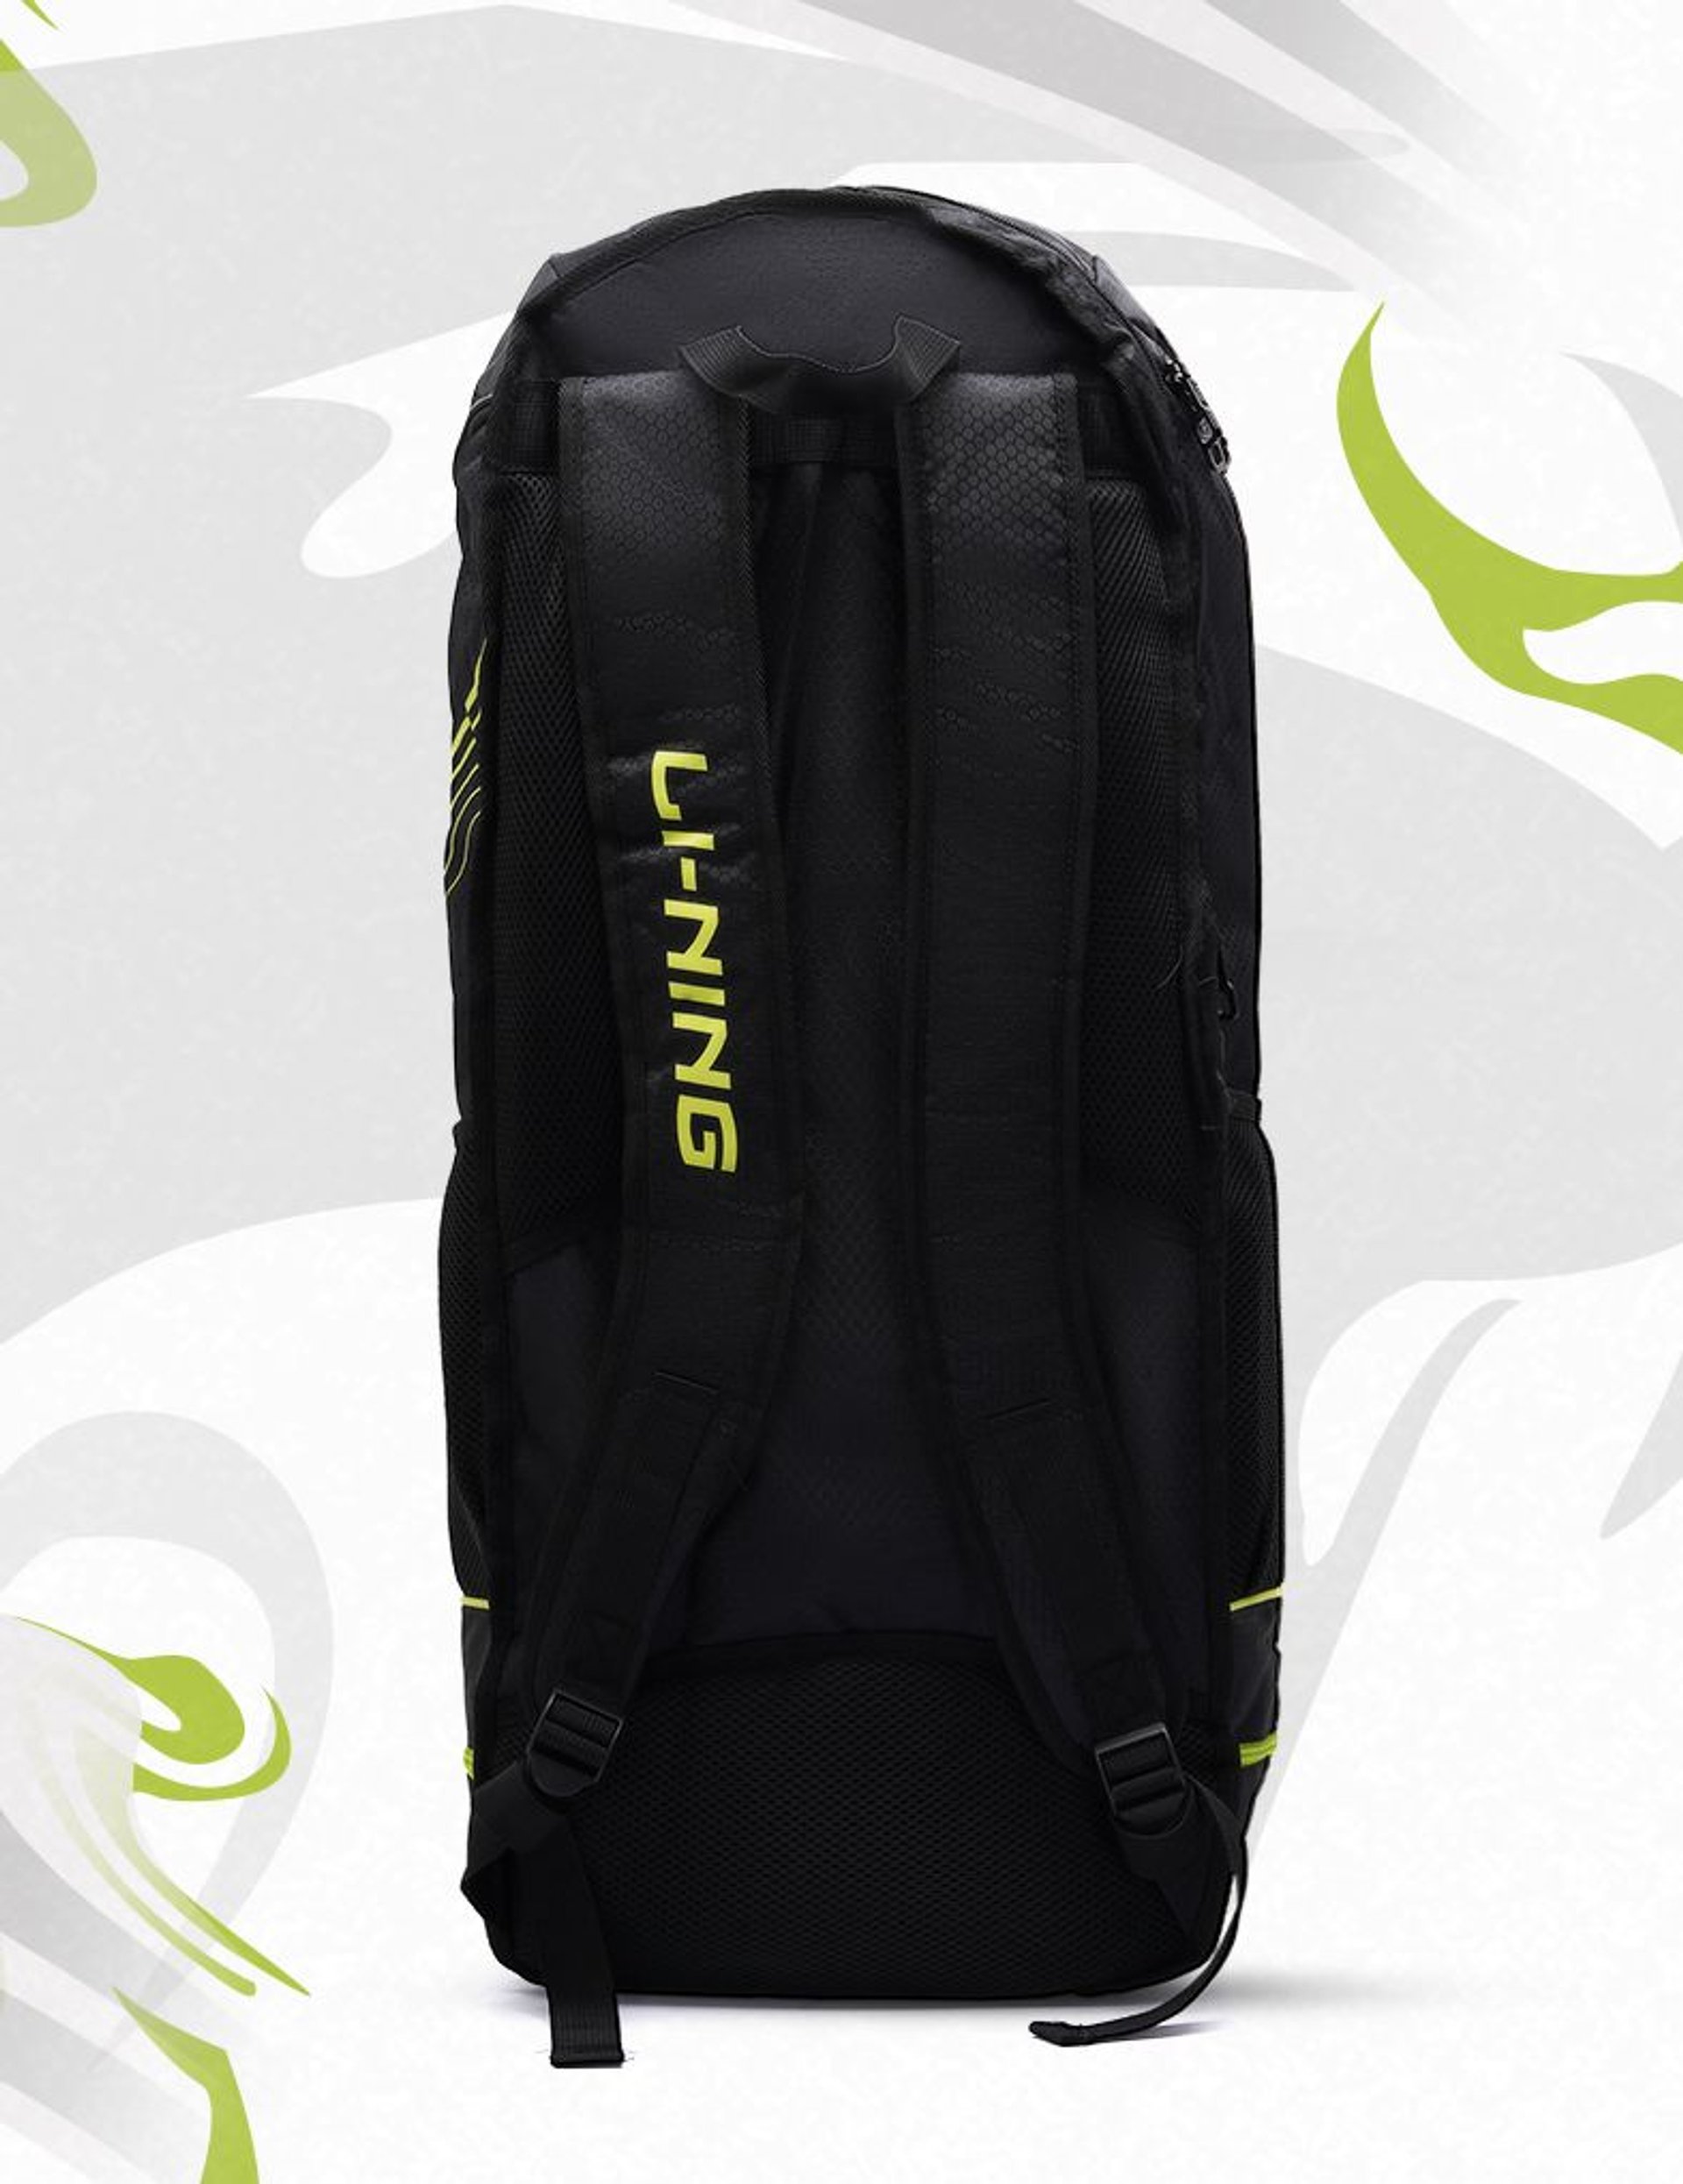 Court Pro Backpack - Back straps with cushioned back